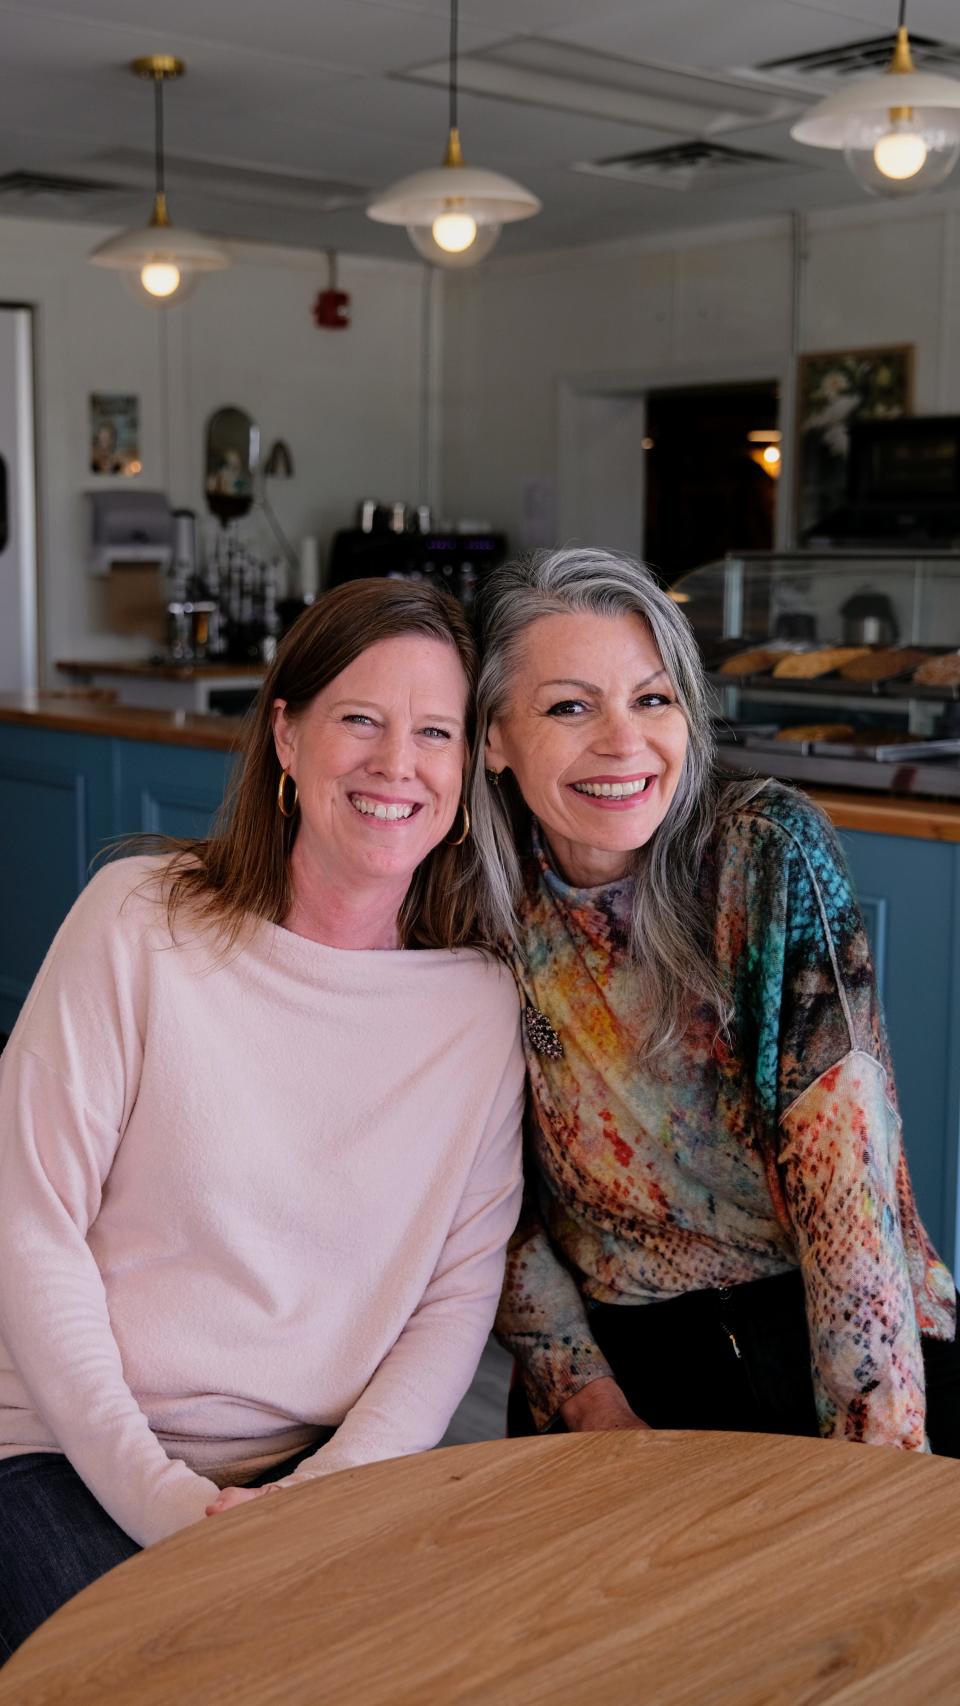 Rebecca Radovich, the baker, and Janine Finn, the bartender, friends for life and co-owners of Lulu's Chocolate Bar on Whitemarsh